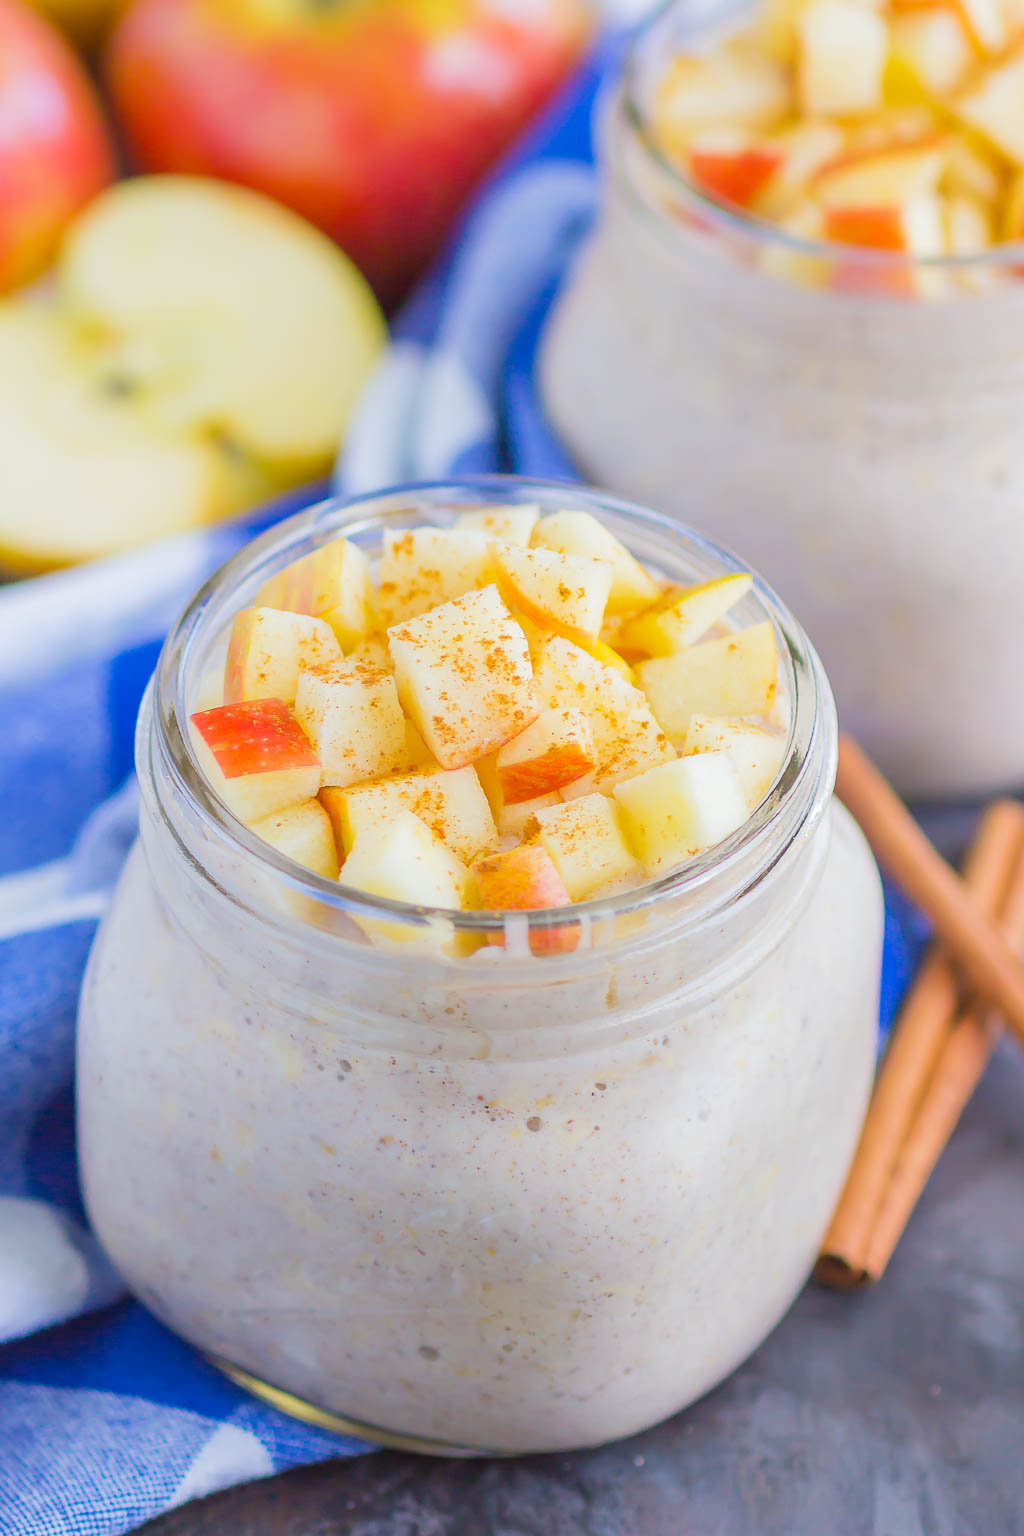 Apple Pie Overnight Oats are a simple, make-ahead breakfast for busy mornings. With just five minutes of prep time and no oven required, this hearty dish is filled with cozy flavors and perfect to keep you going all morning long!